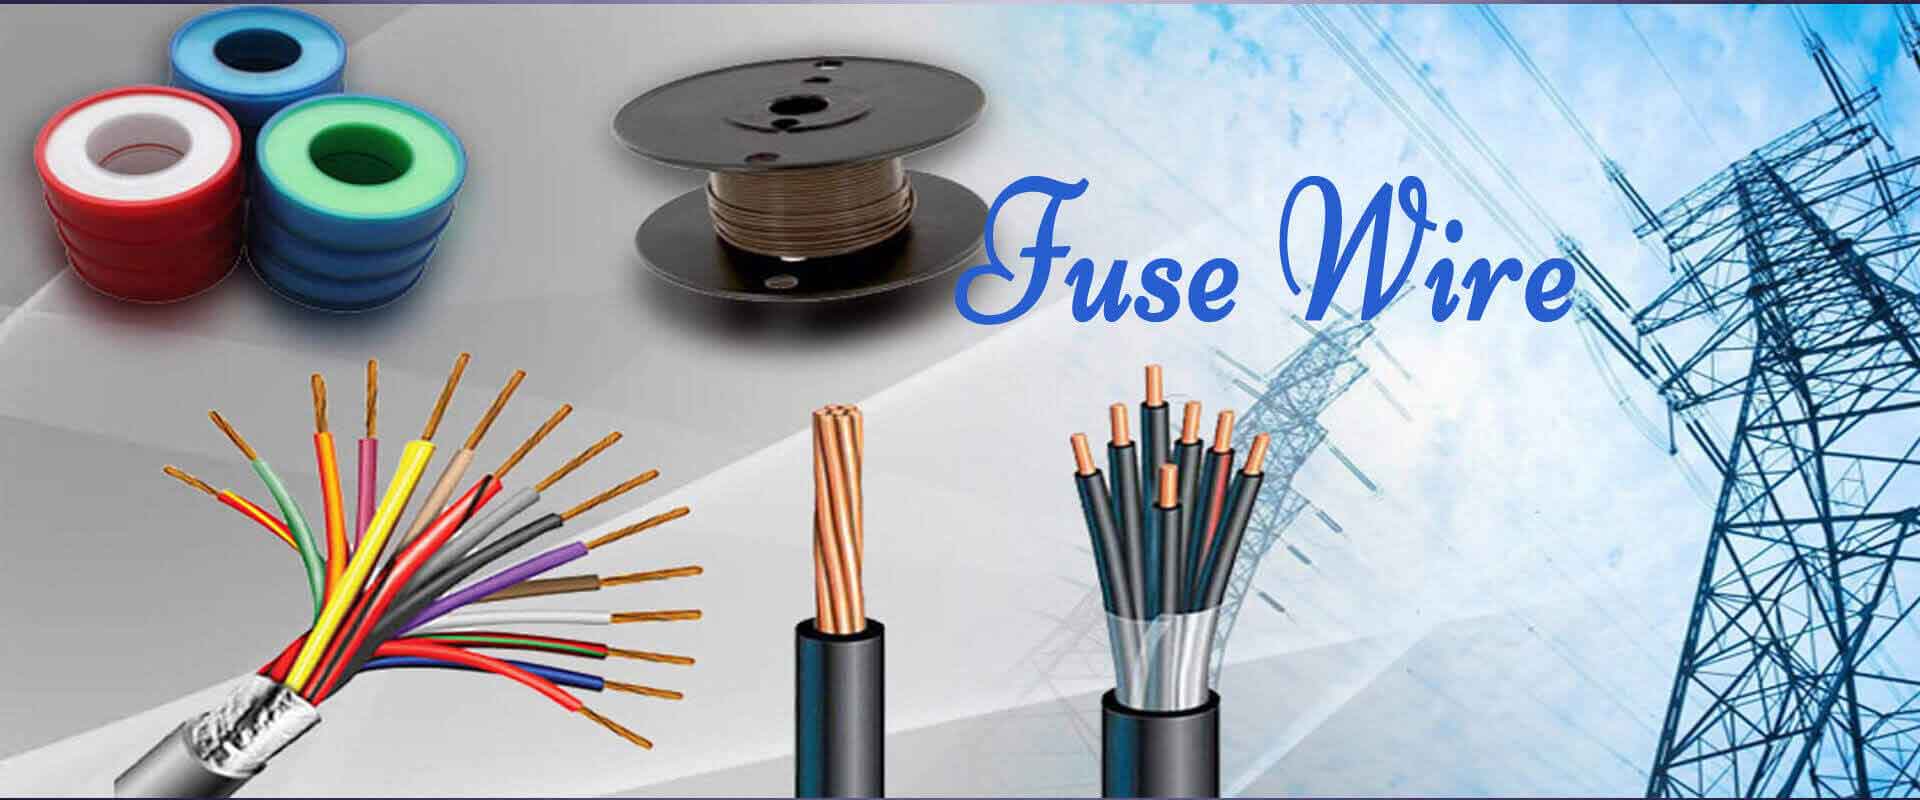 Silver Plated Copper Wire For Fuse In Texas